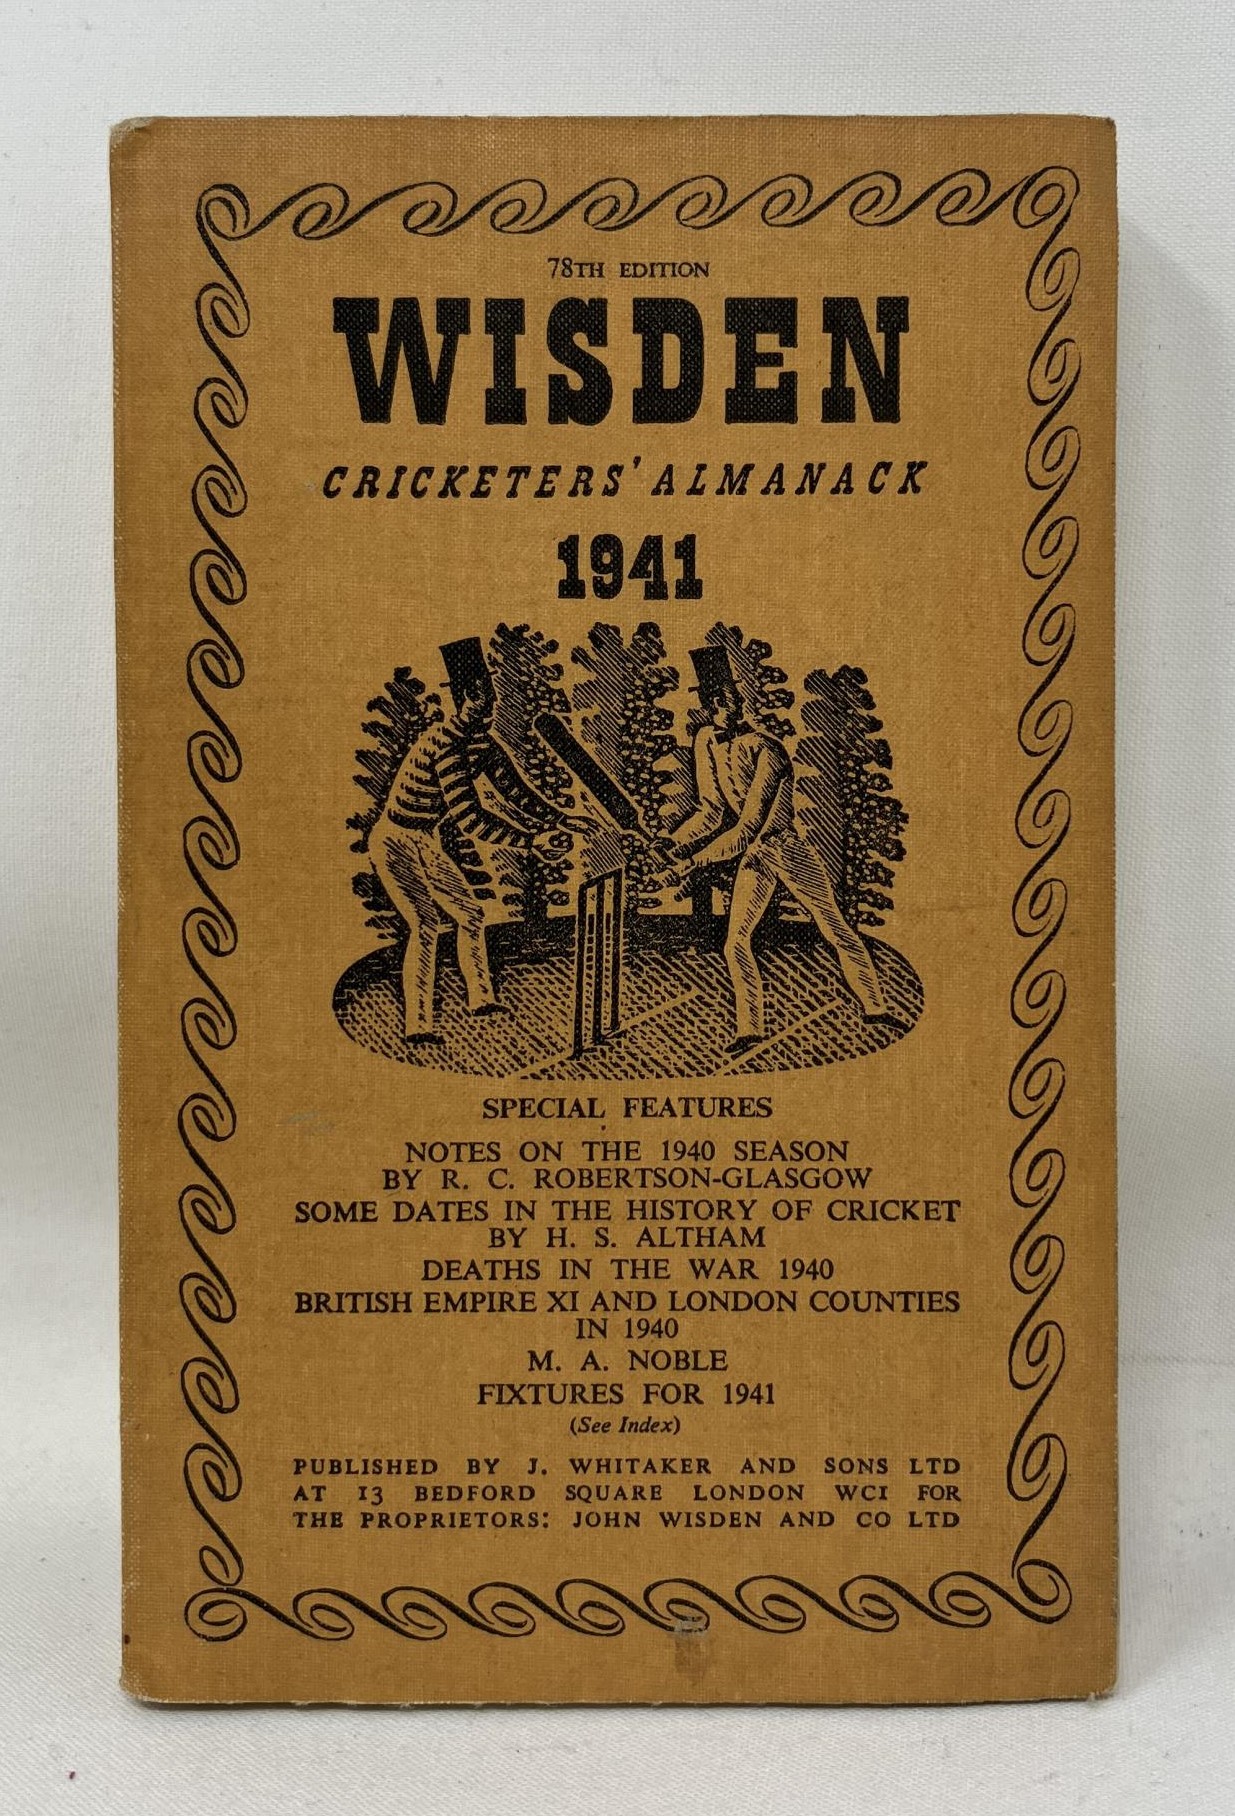 A Wisden Cricketers' Almanack, 1941 Provenance:  From the Harry Brewer Cricket Memorabilia - Image 2 of 3